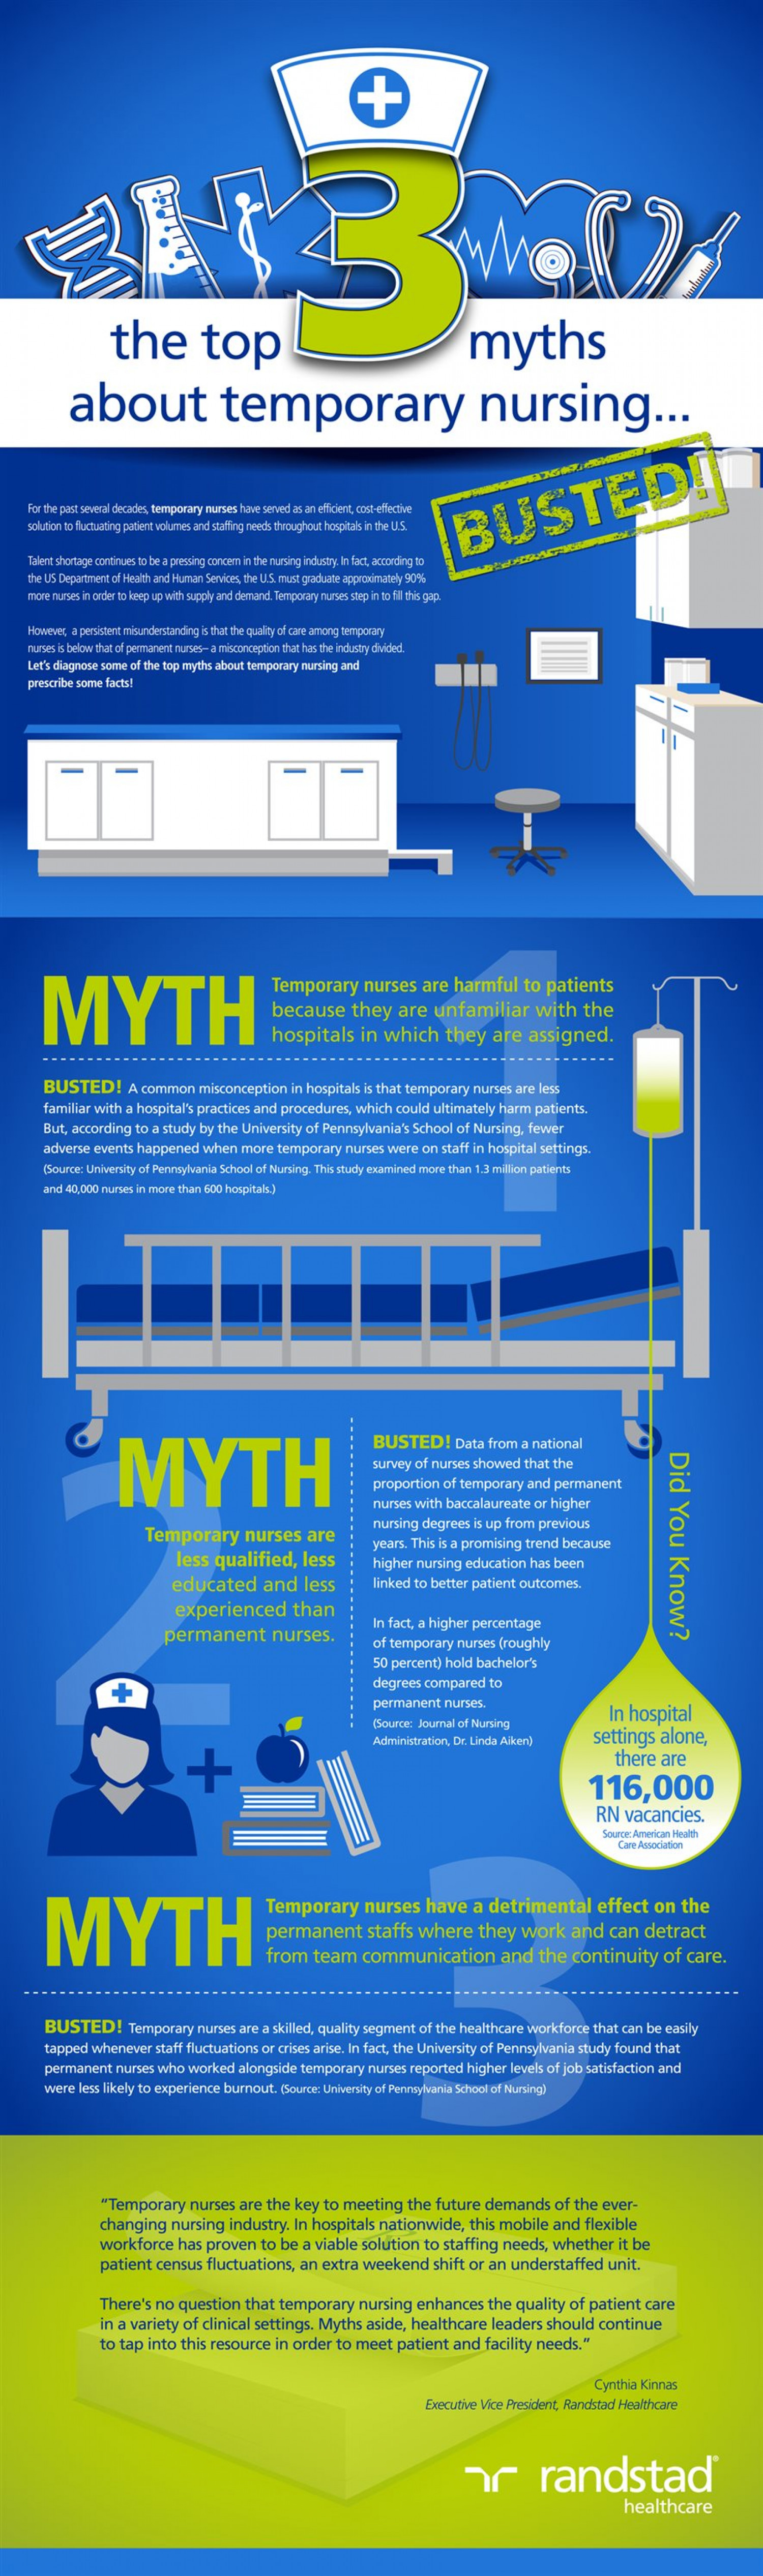 The Top 3 Myths About Temporary Nursing Infographic